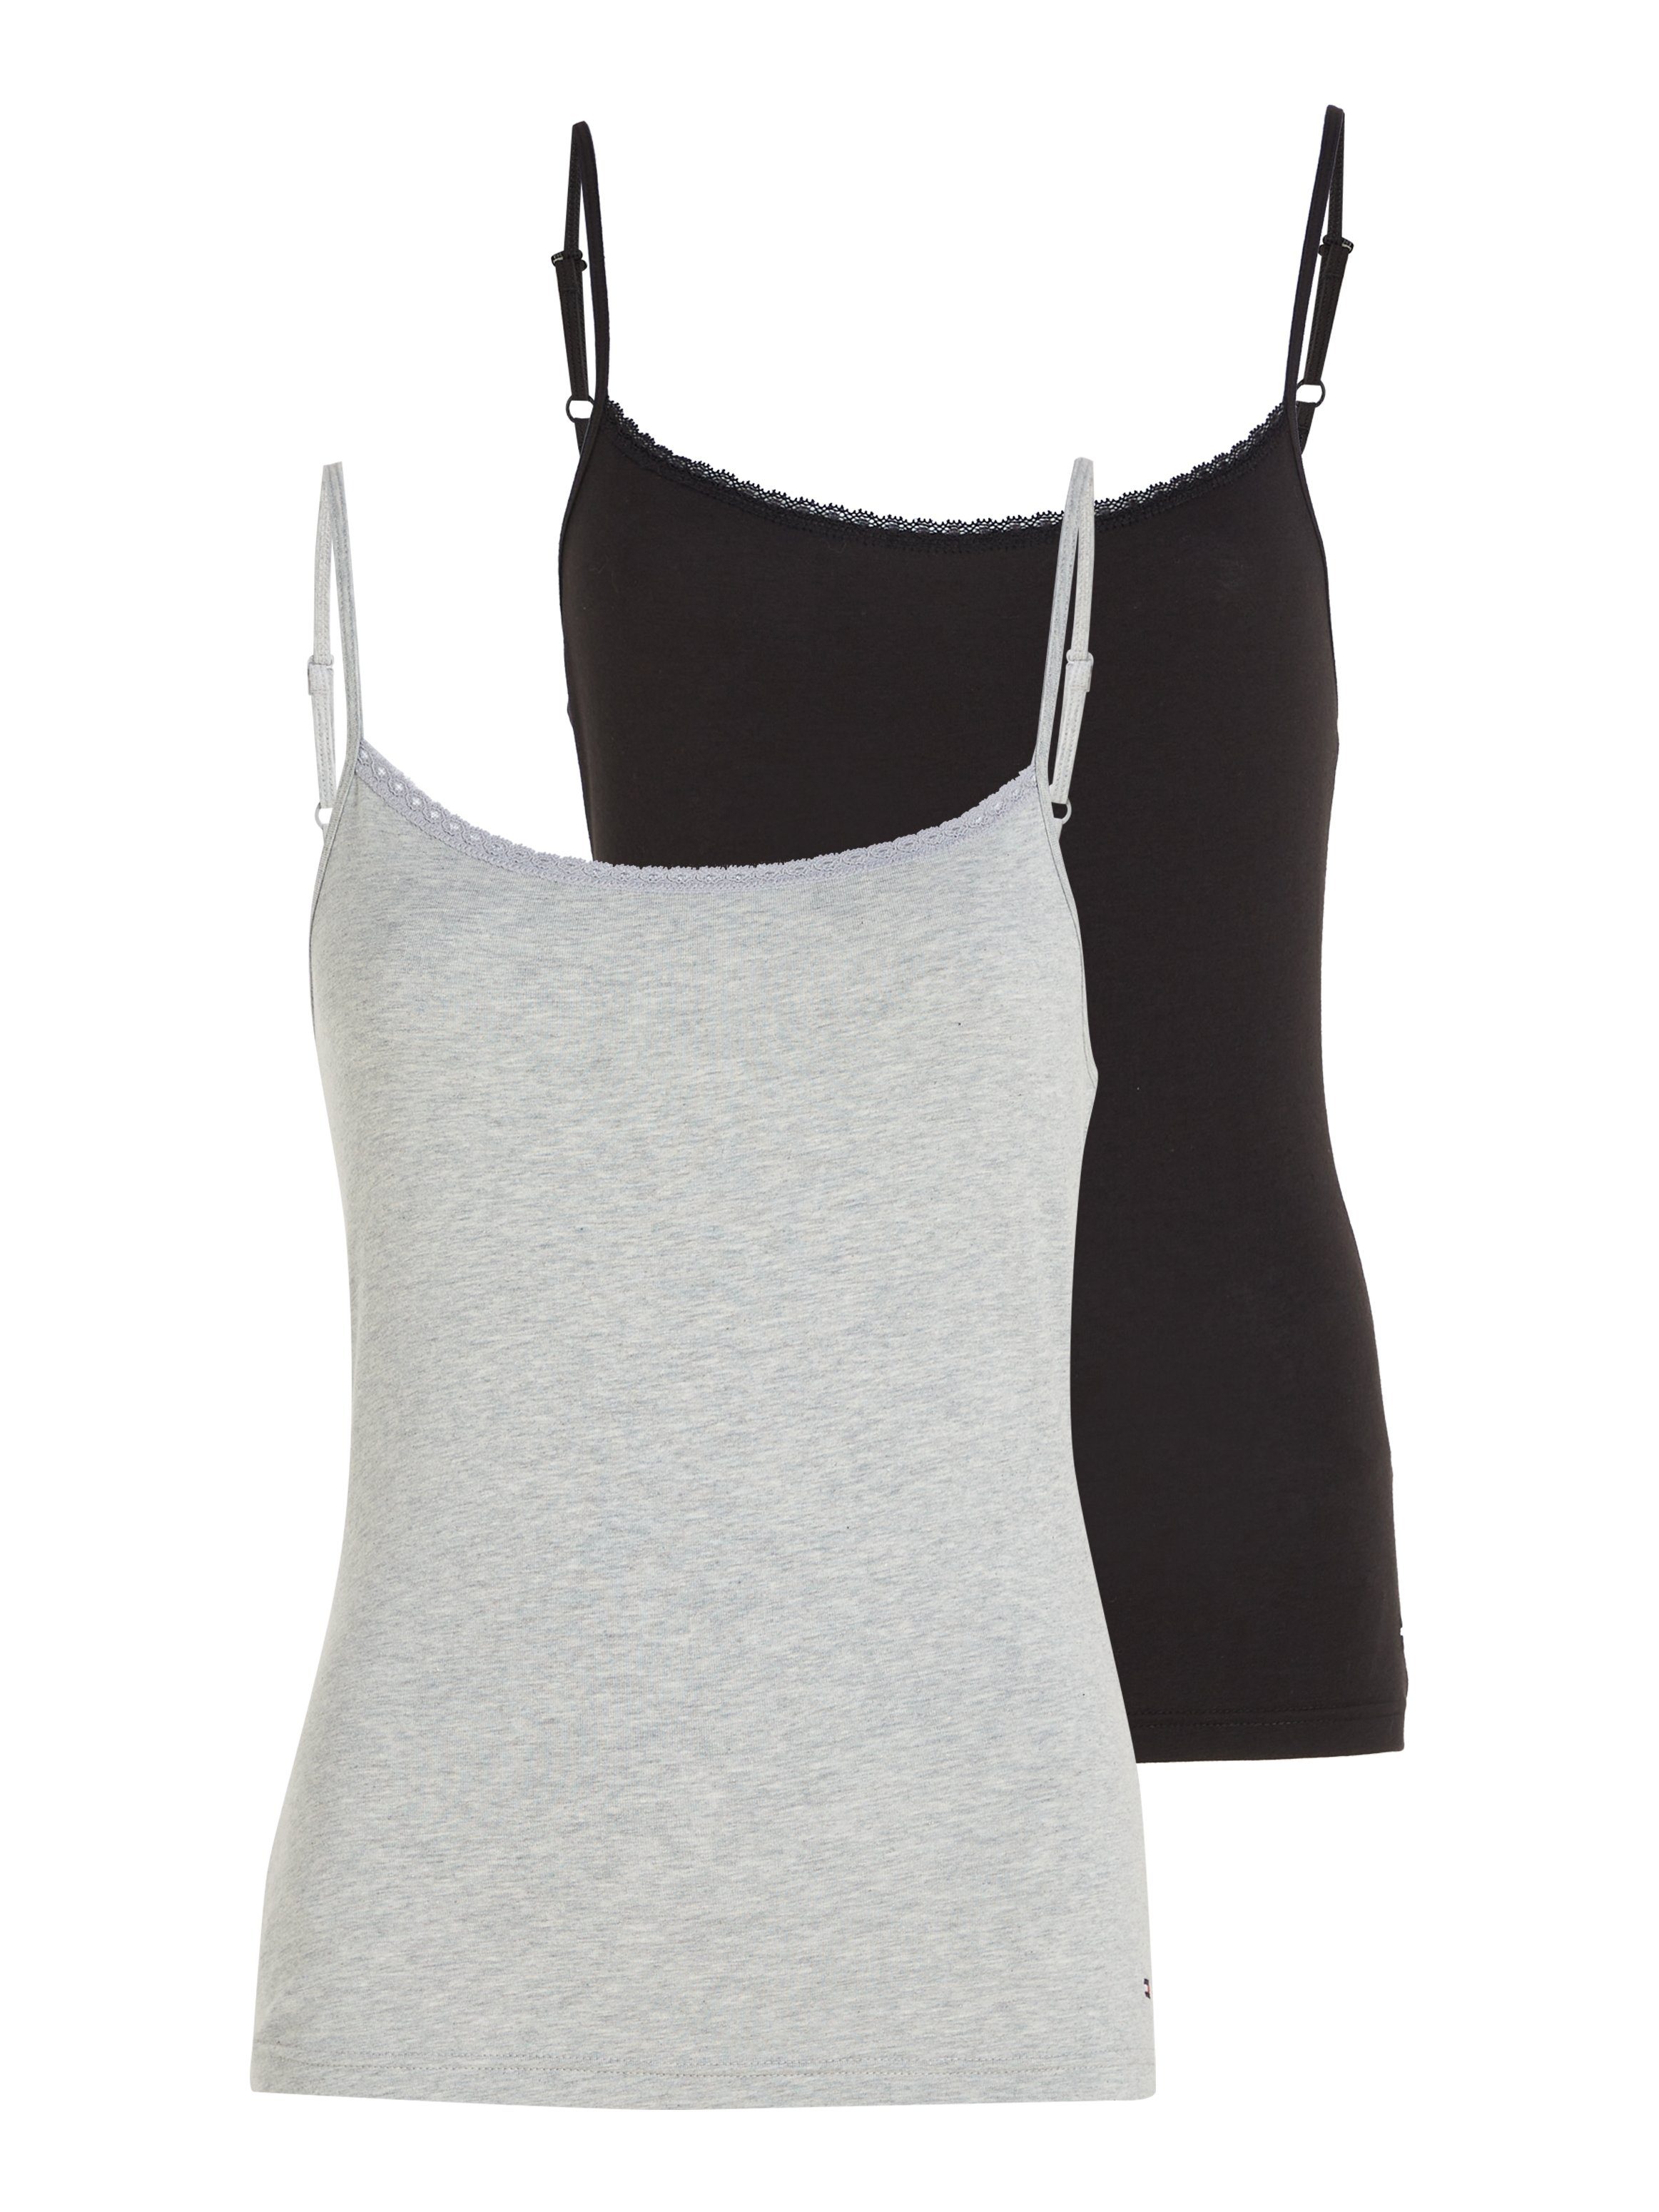 Tommy Hilfiger Underwear Spaghettitop 2 PACK CAMI WITH LACE (Packung, 2er-Pack) Black/Grey_Heather